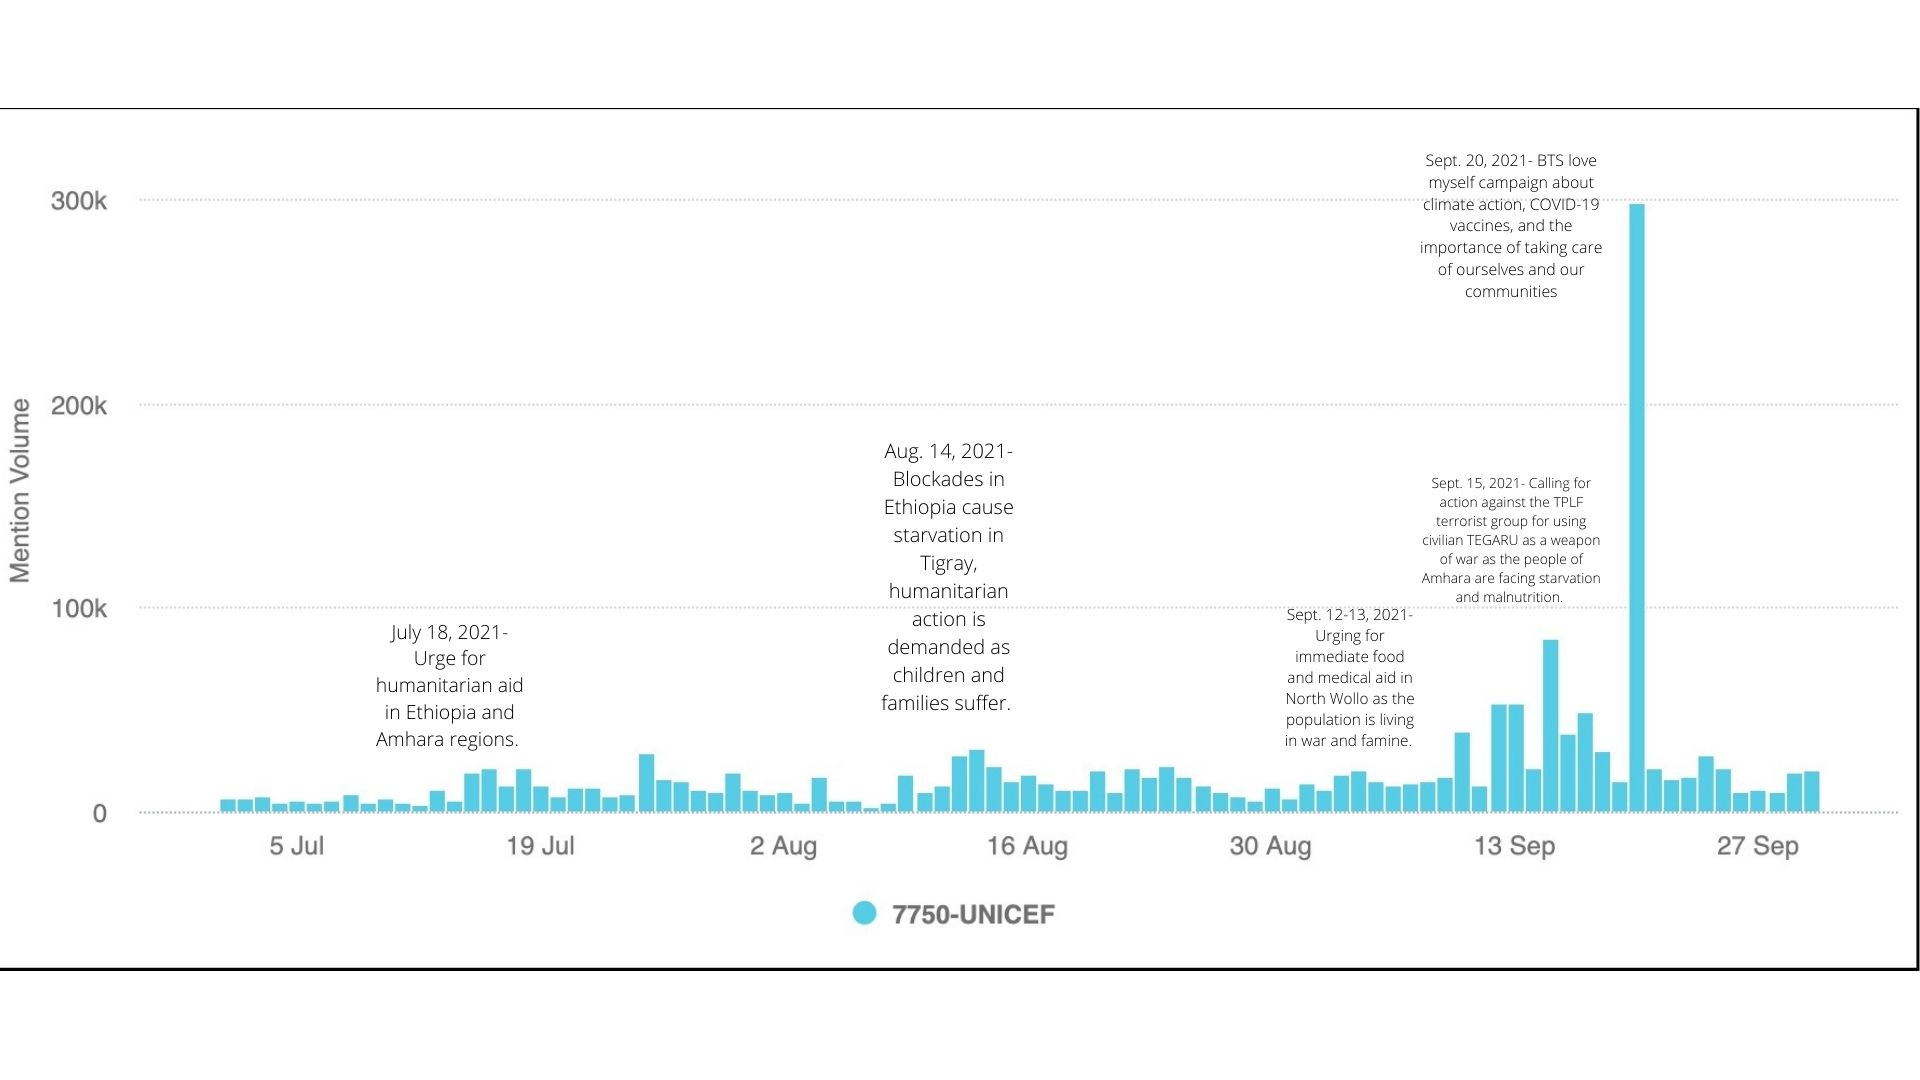 Spike Analysis of UNICEF’s Mention Volume Over Time